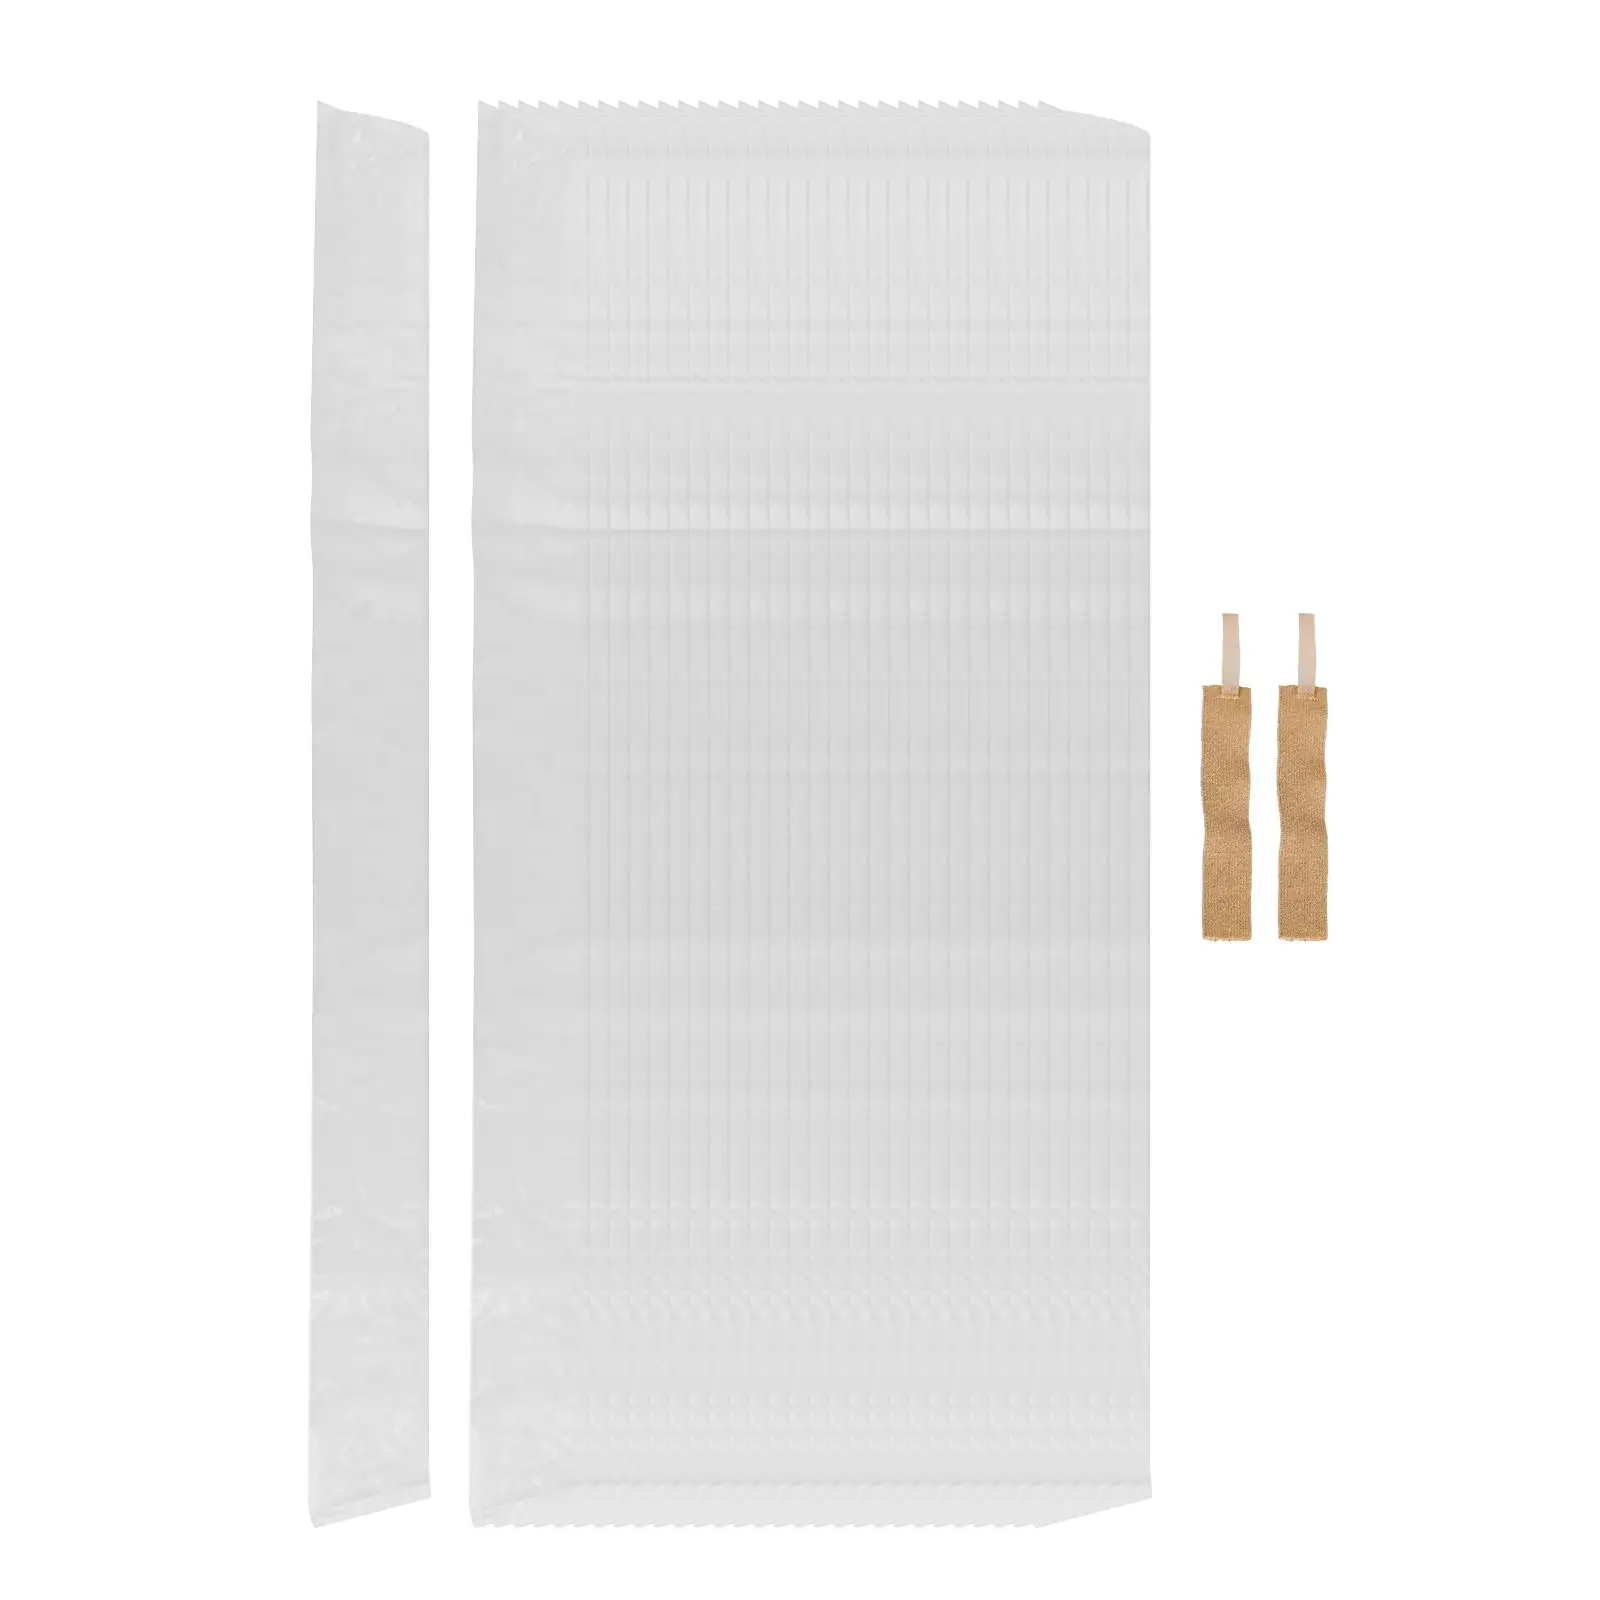 30 Pieces Male Urinal Bag up to 1700ml Pee Bags for Emergency